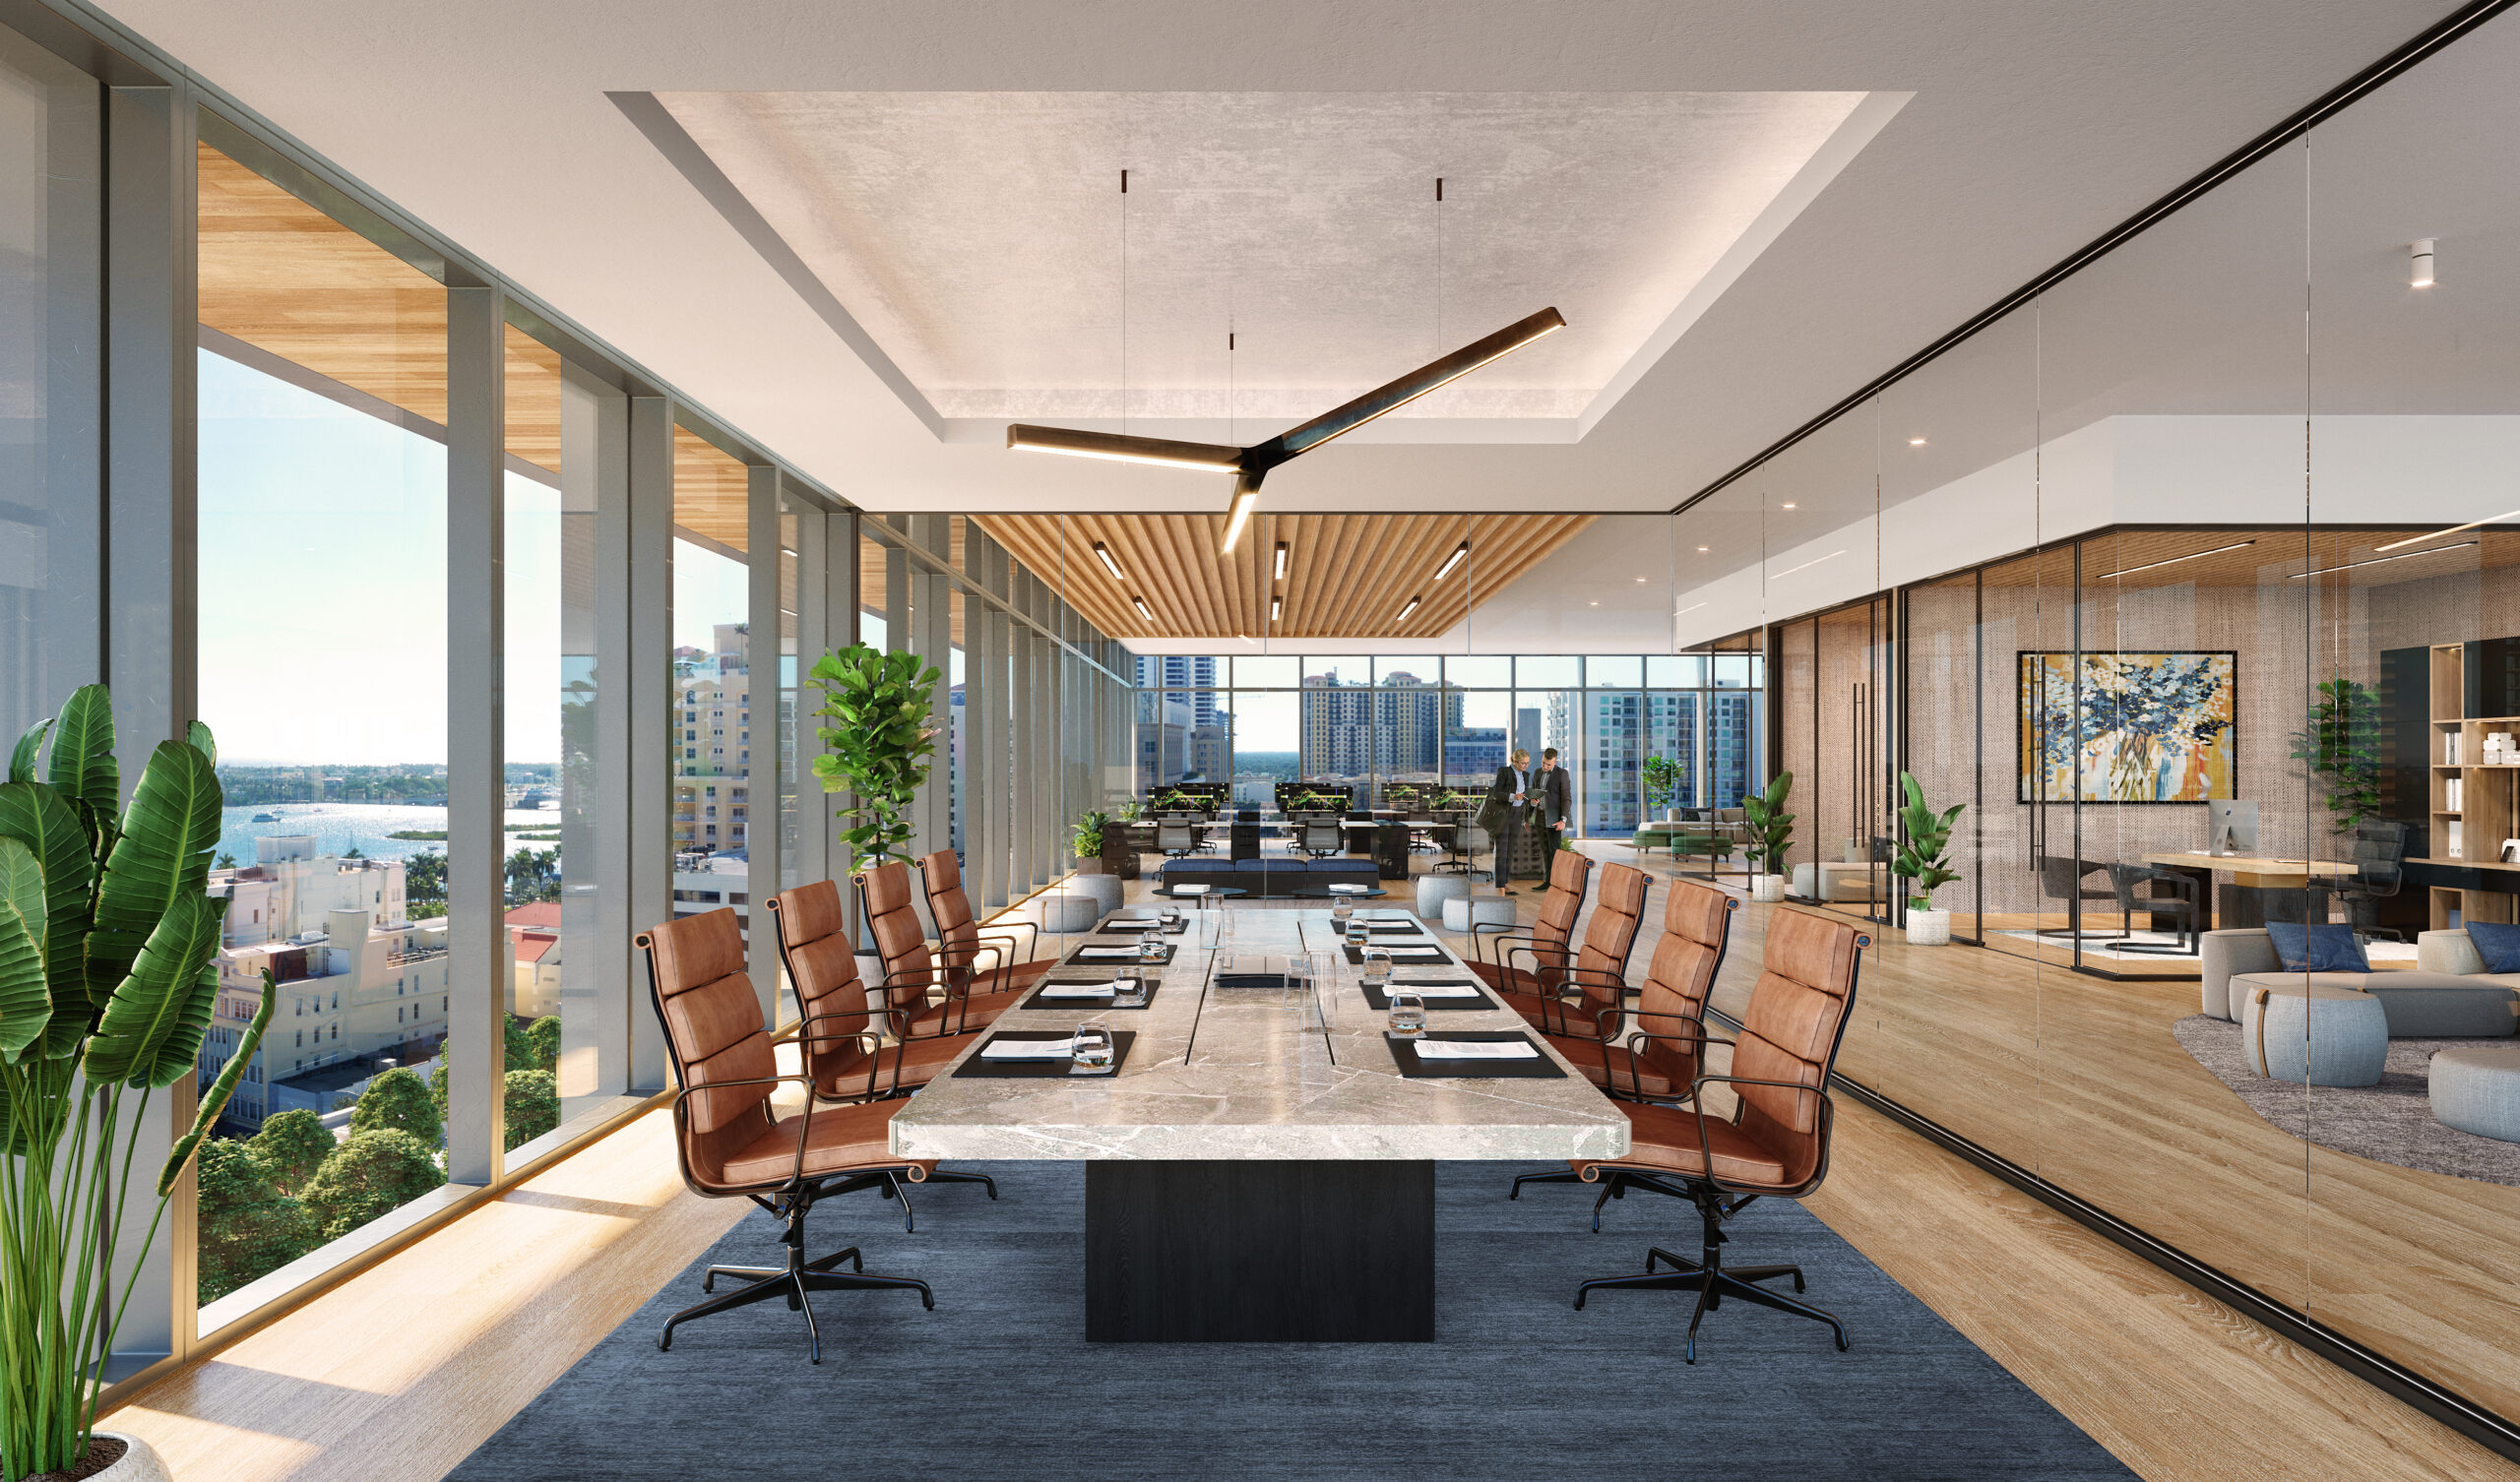 300 - Conference Room